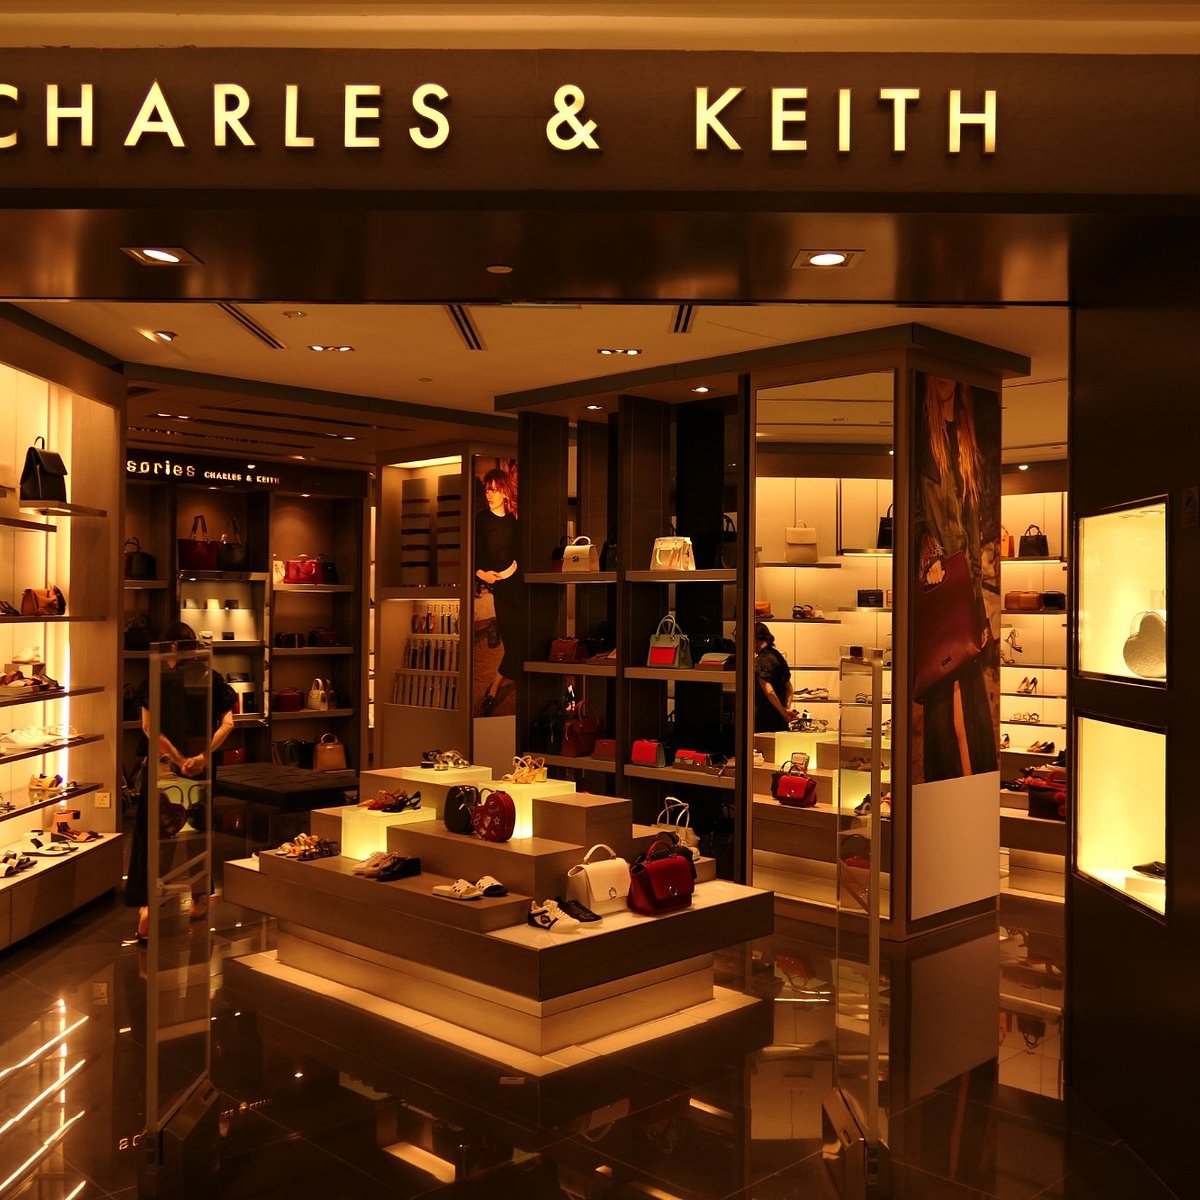 charles and keith